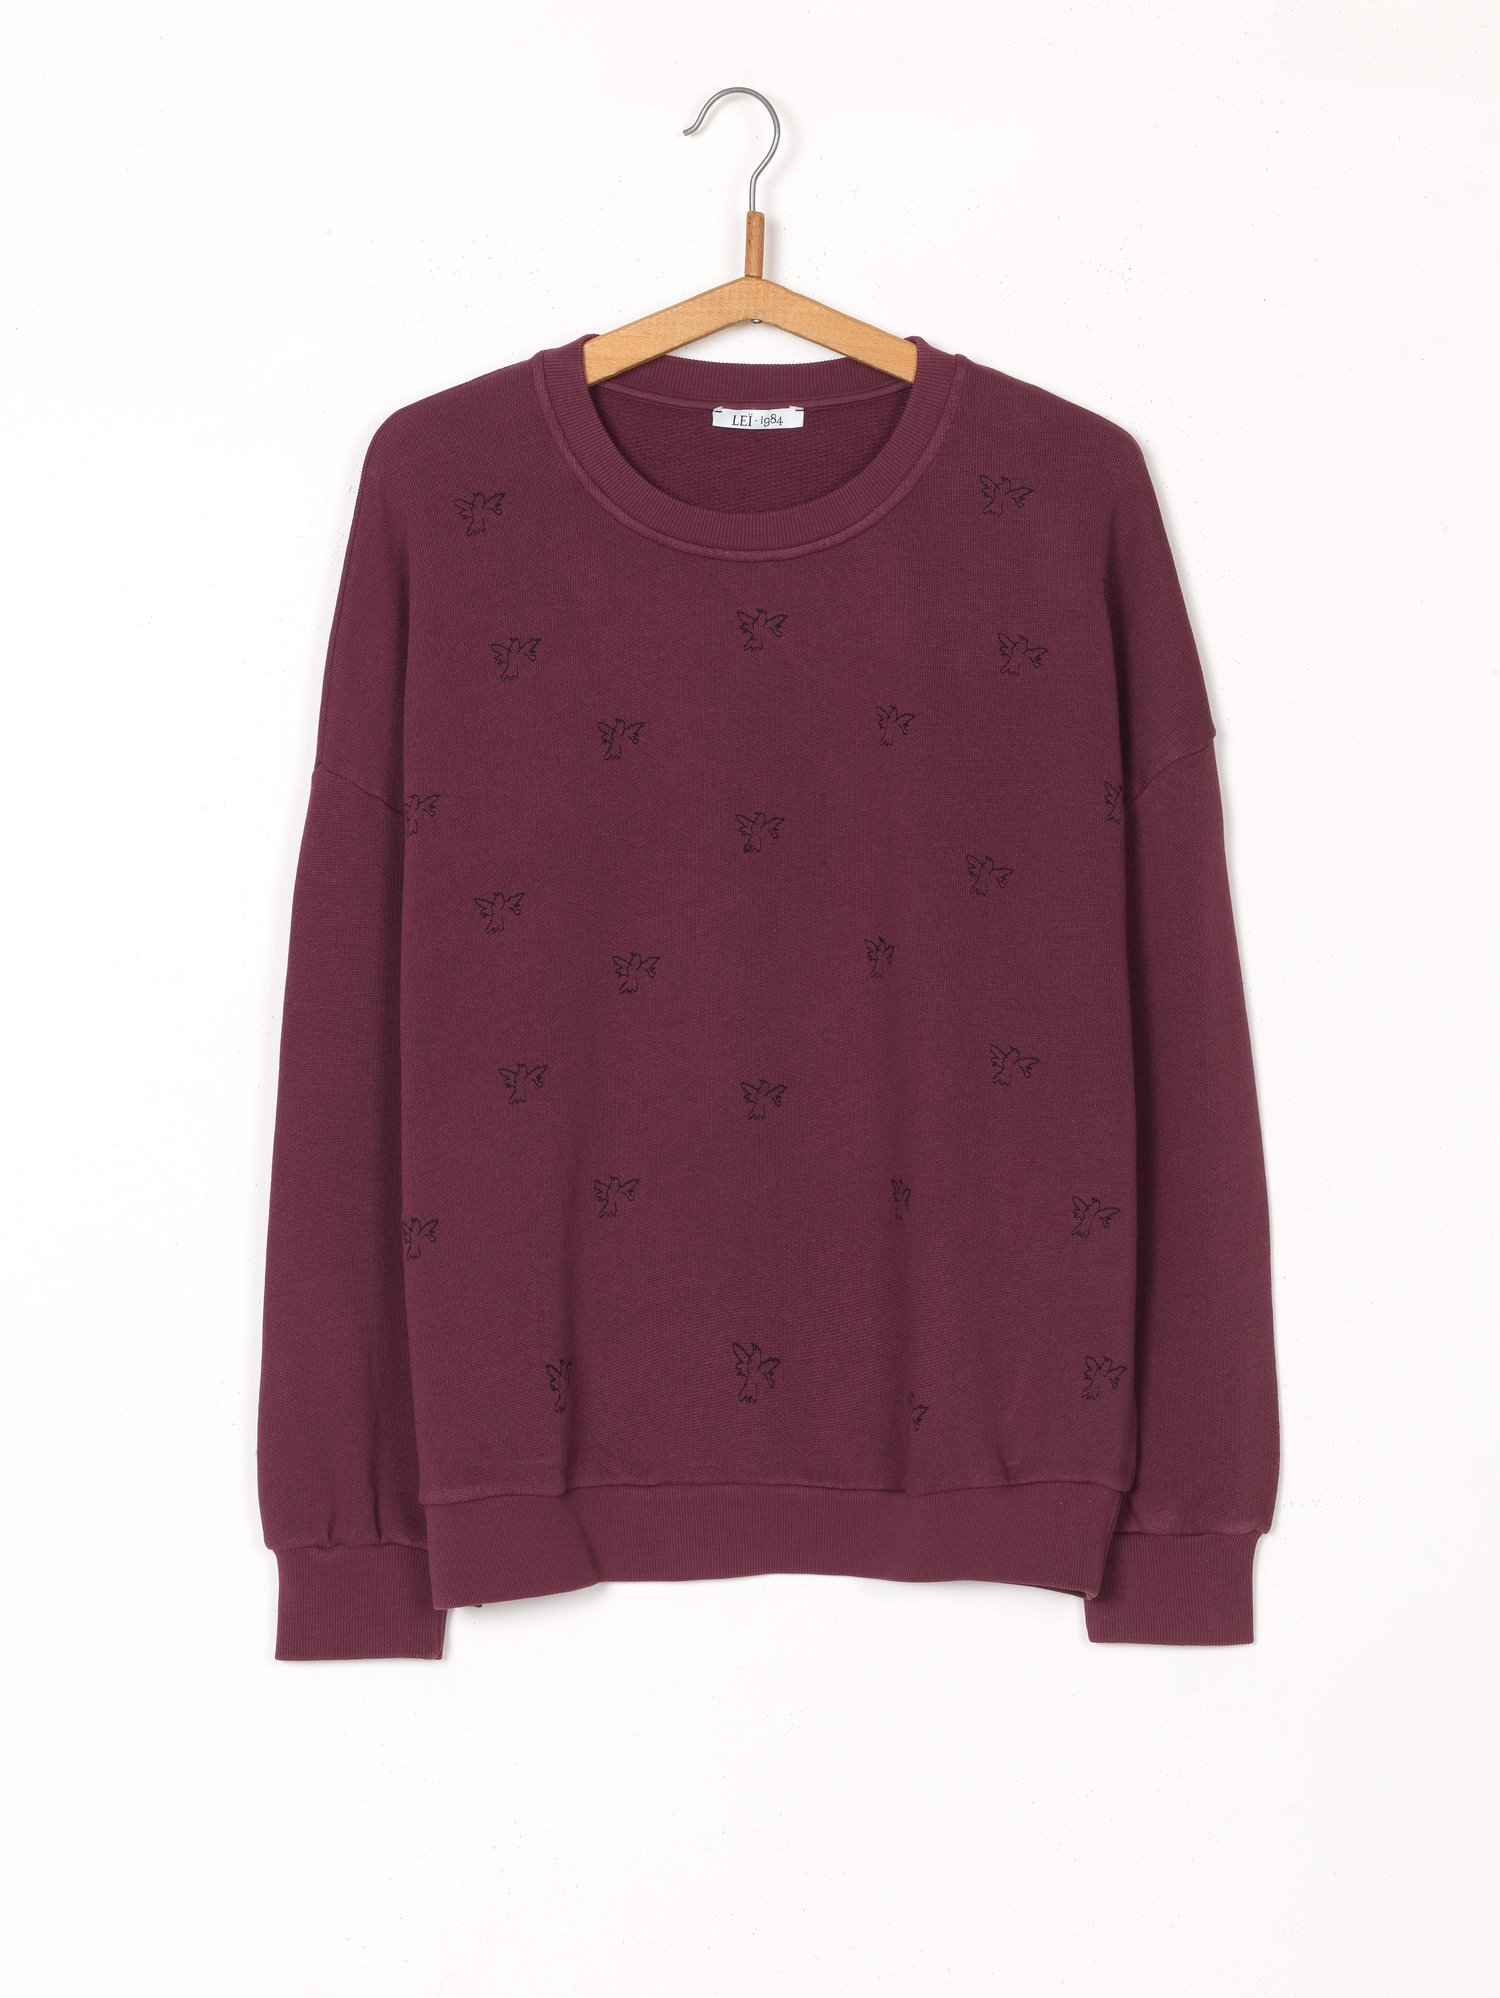 Image of Sweat broderies colombes AUGUSTIN bordeaux 95€ -60%